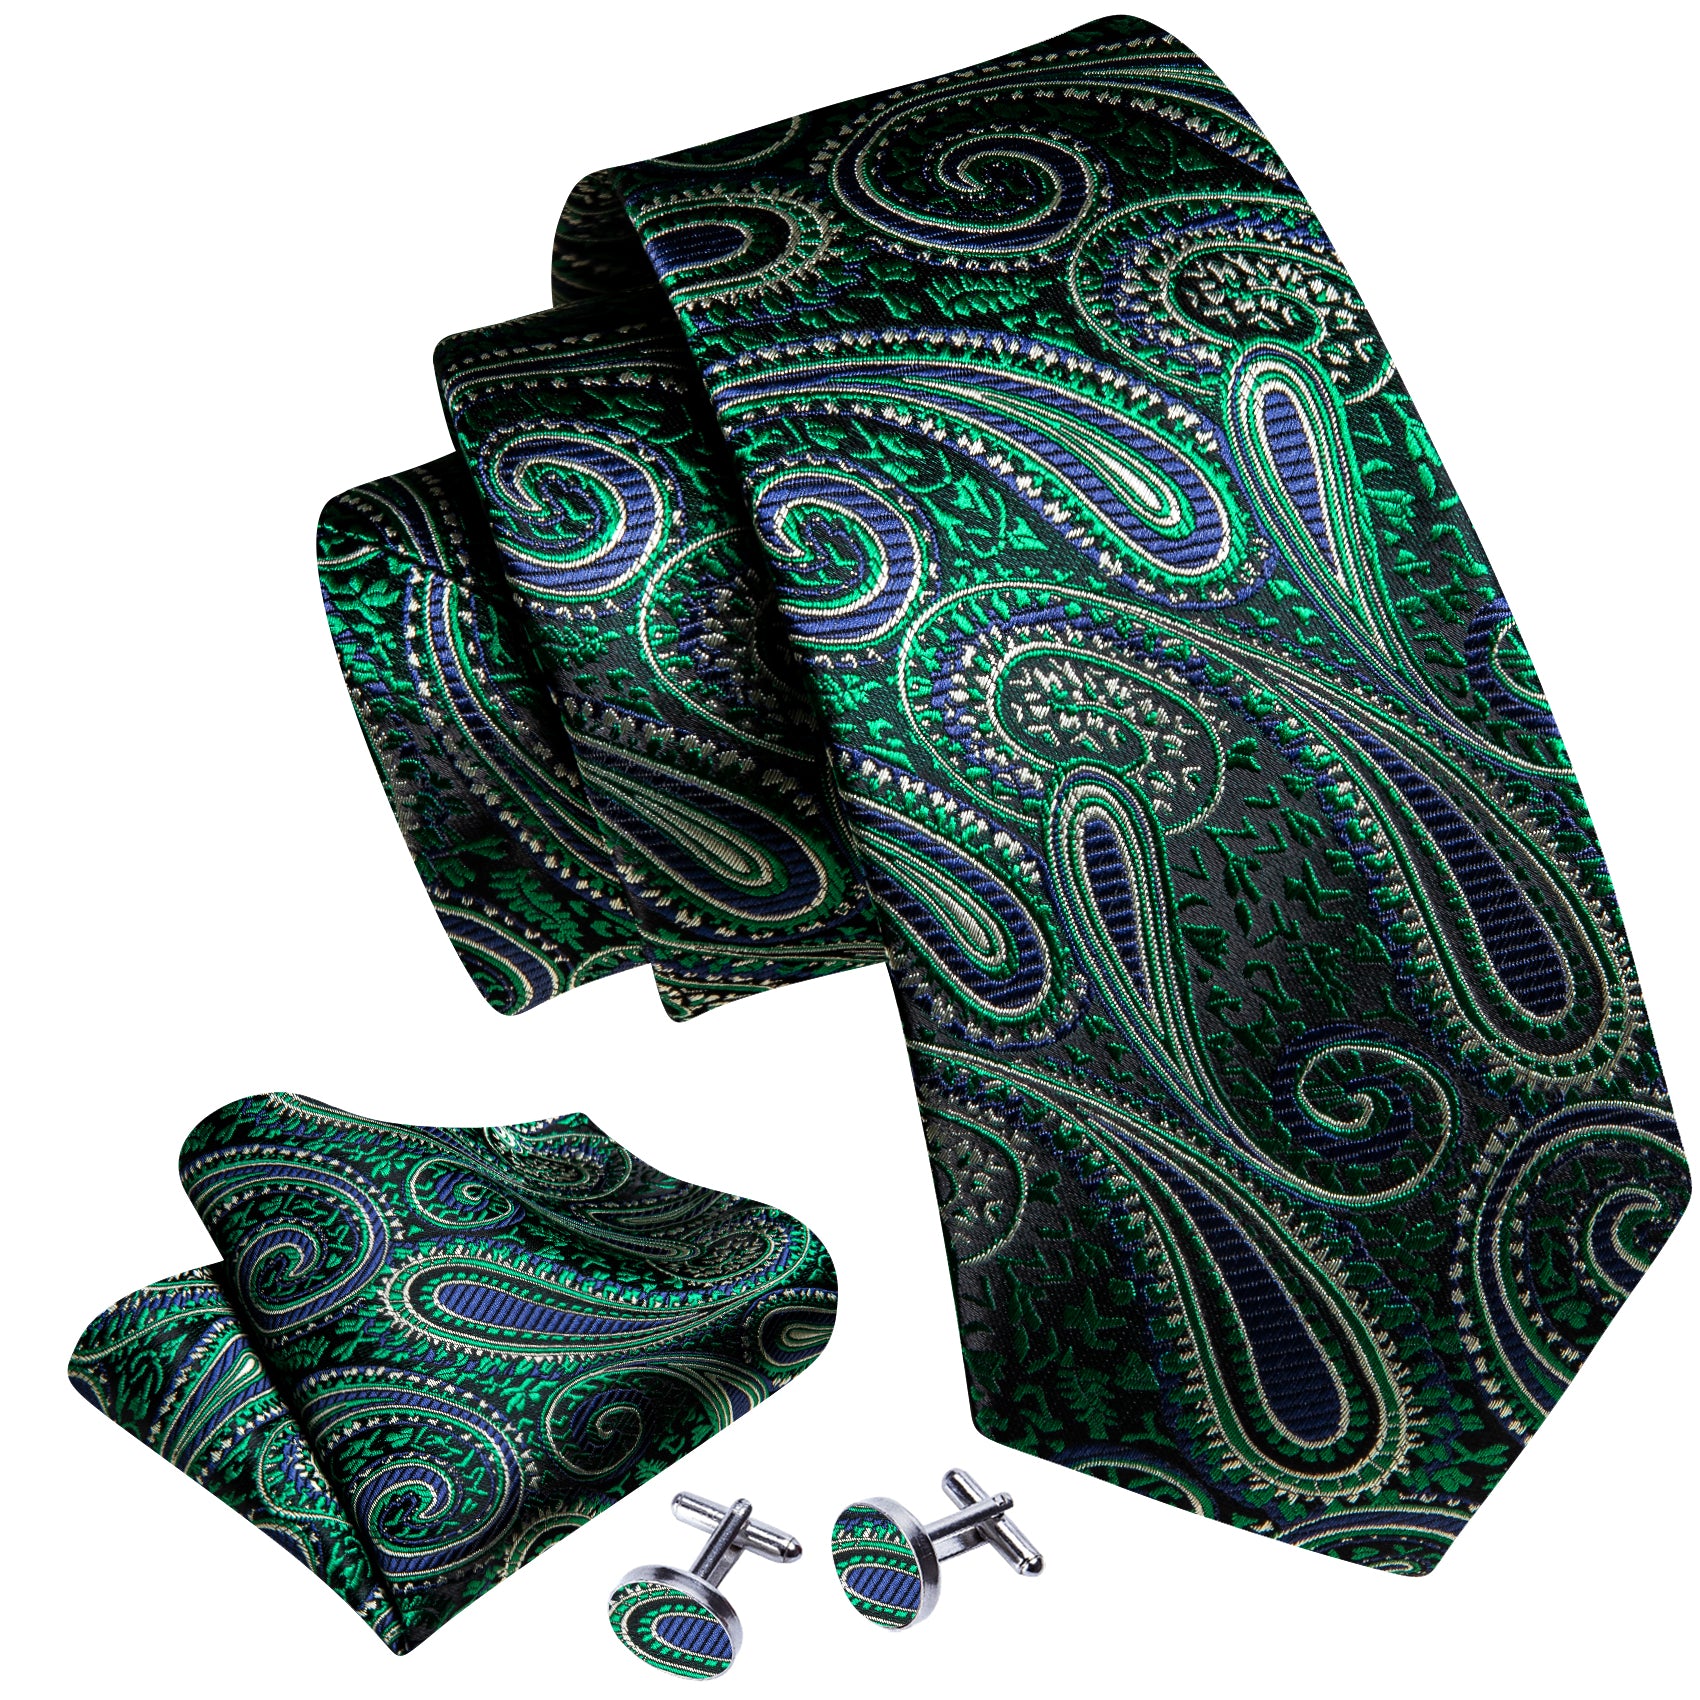 Barry.wang Green Tie Paisley Silk Men's Tie Pocket Square Cufflinks Set with Brooches